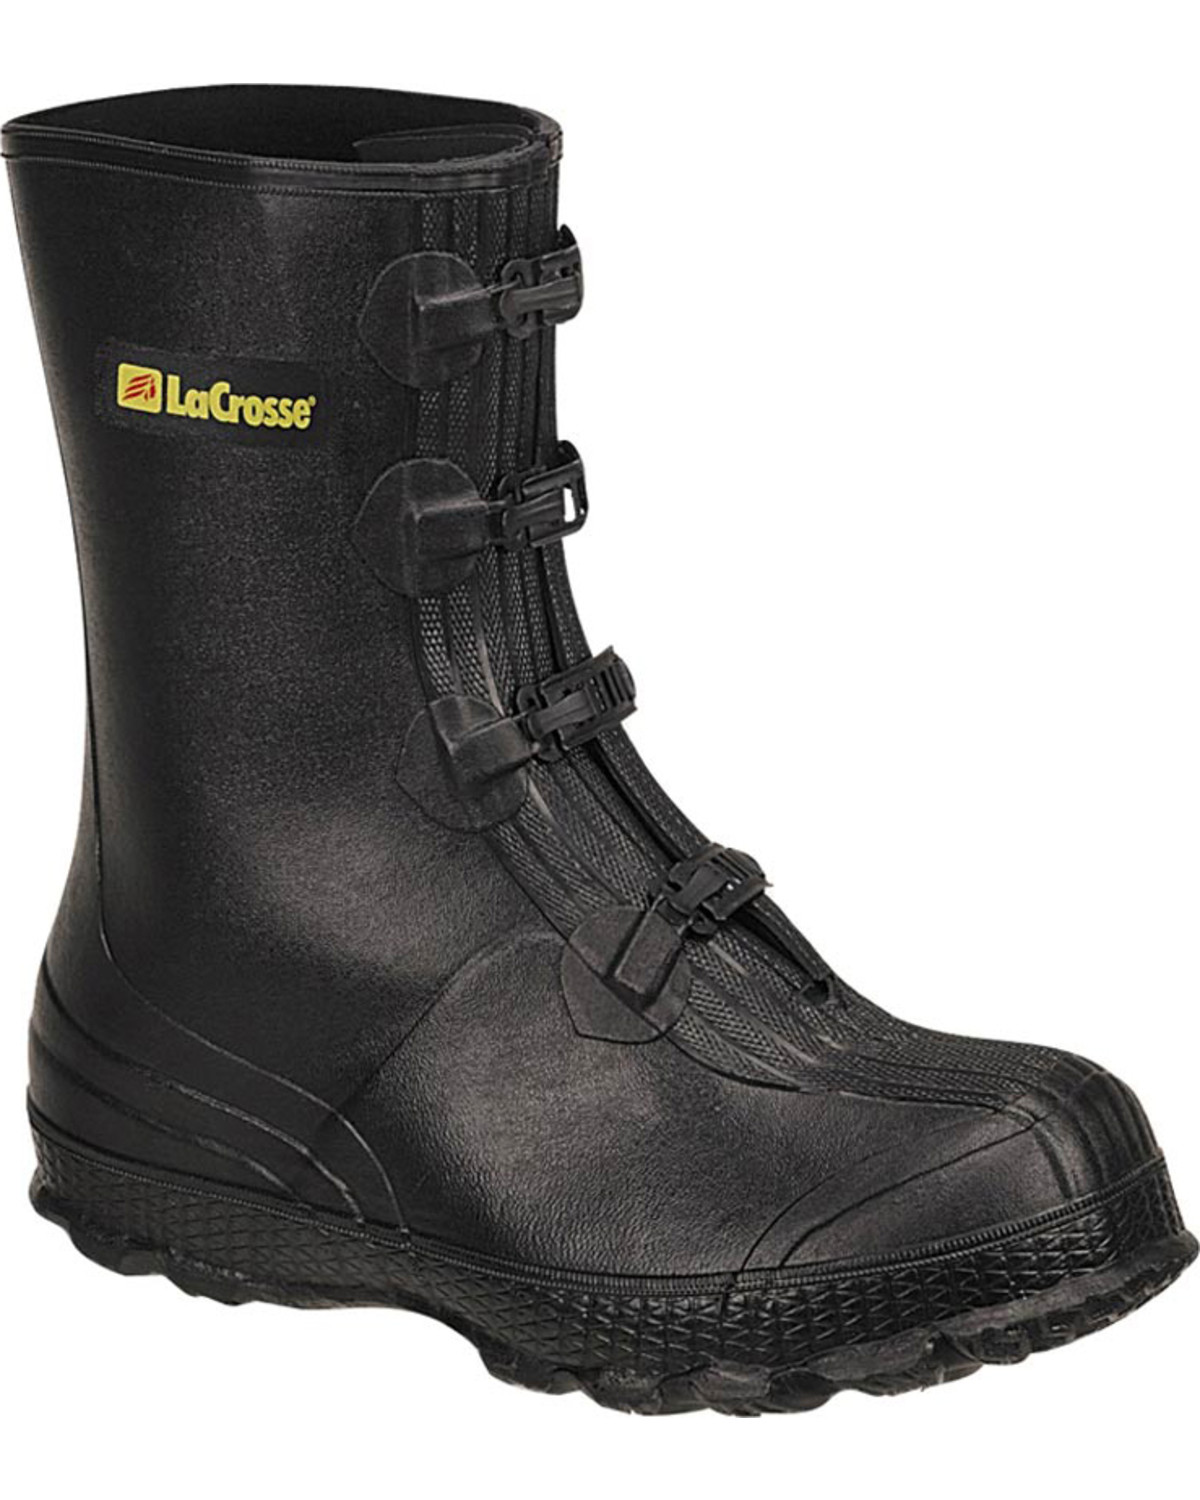 Z-Series Overshoes Rubber Boots | Boot Barn